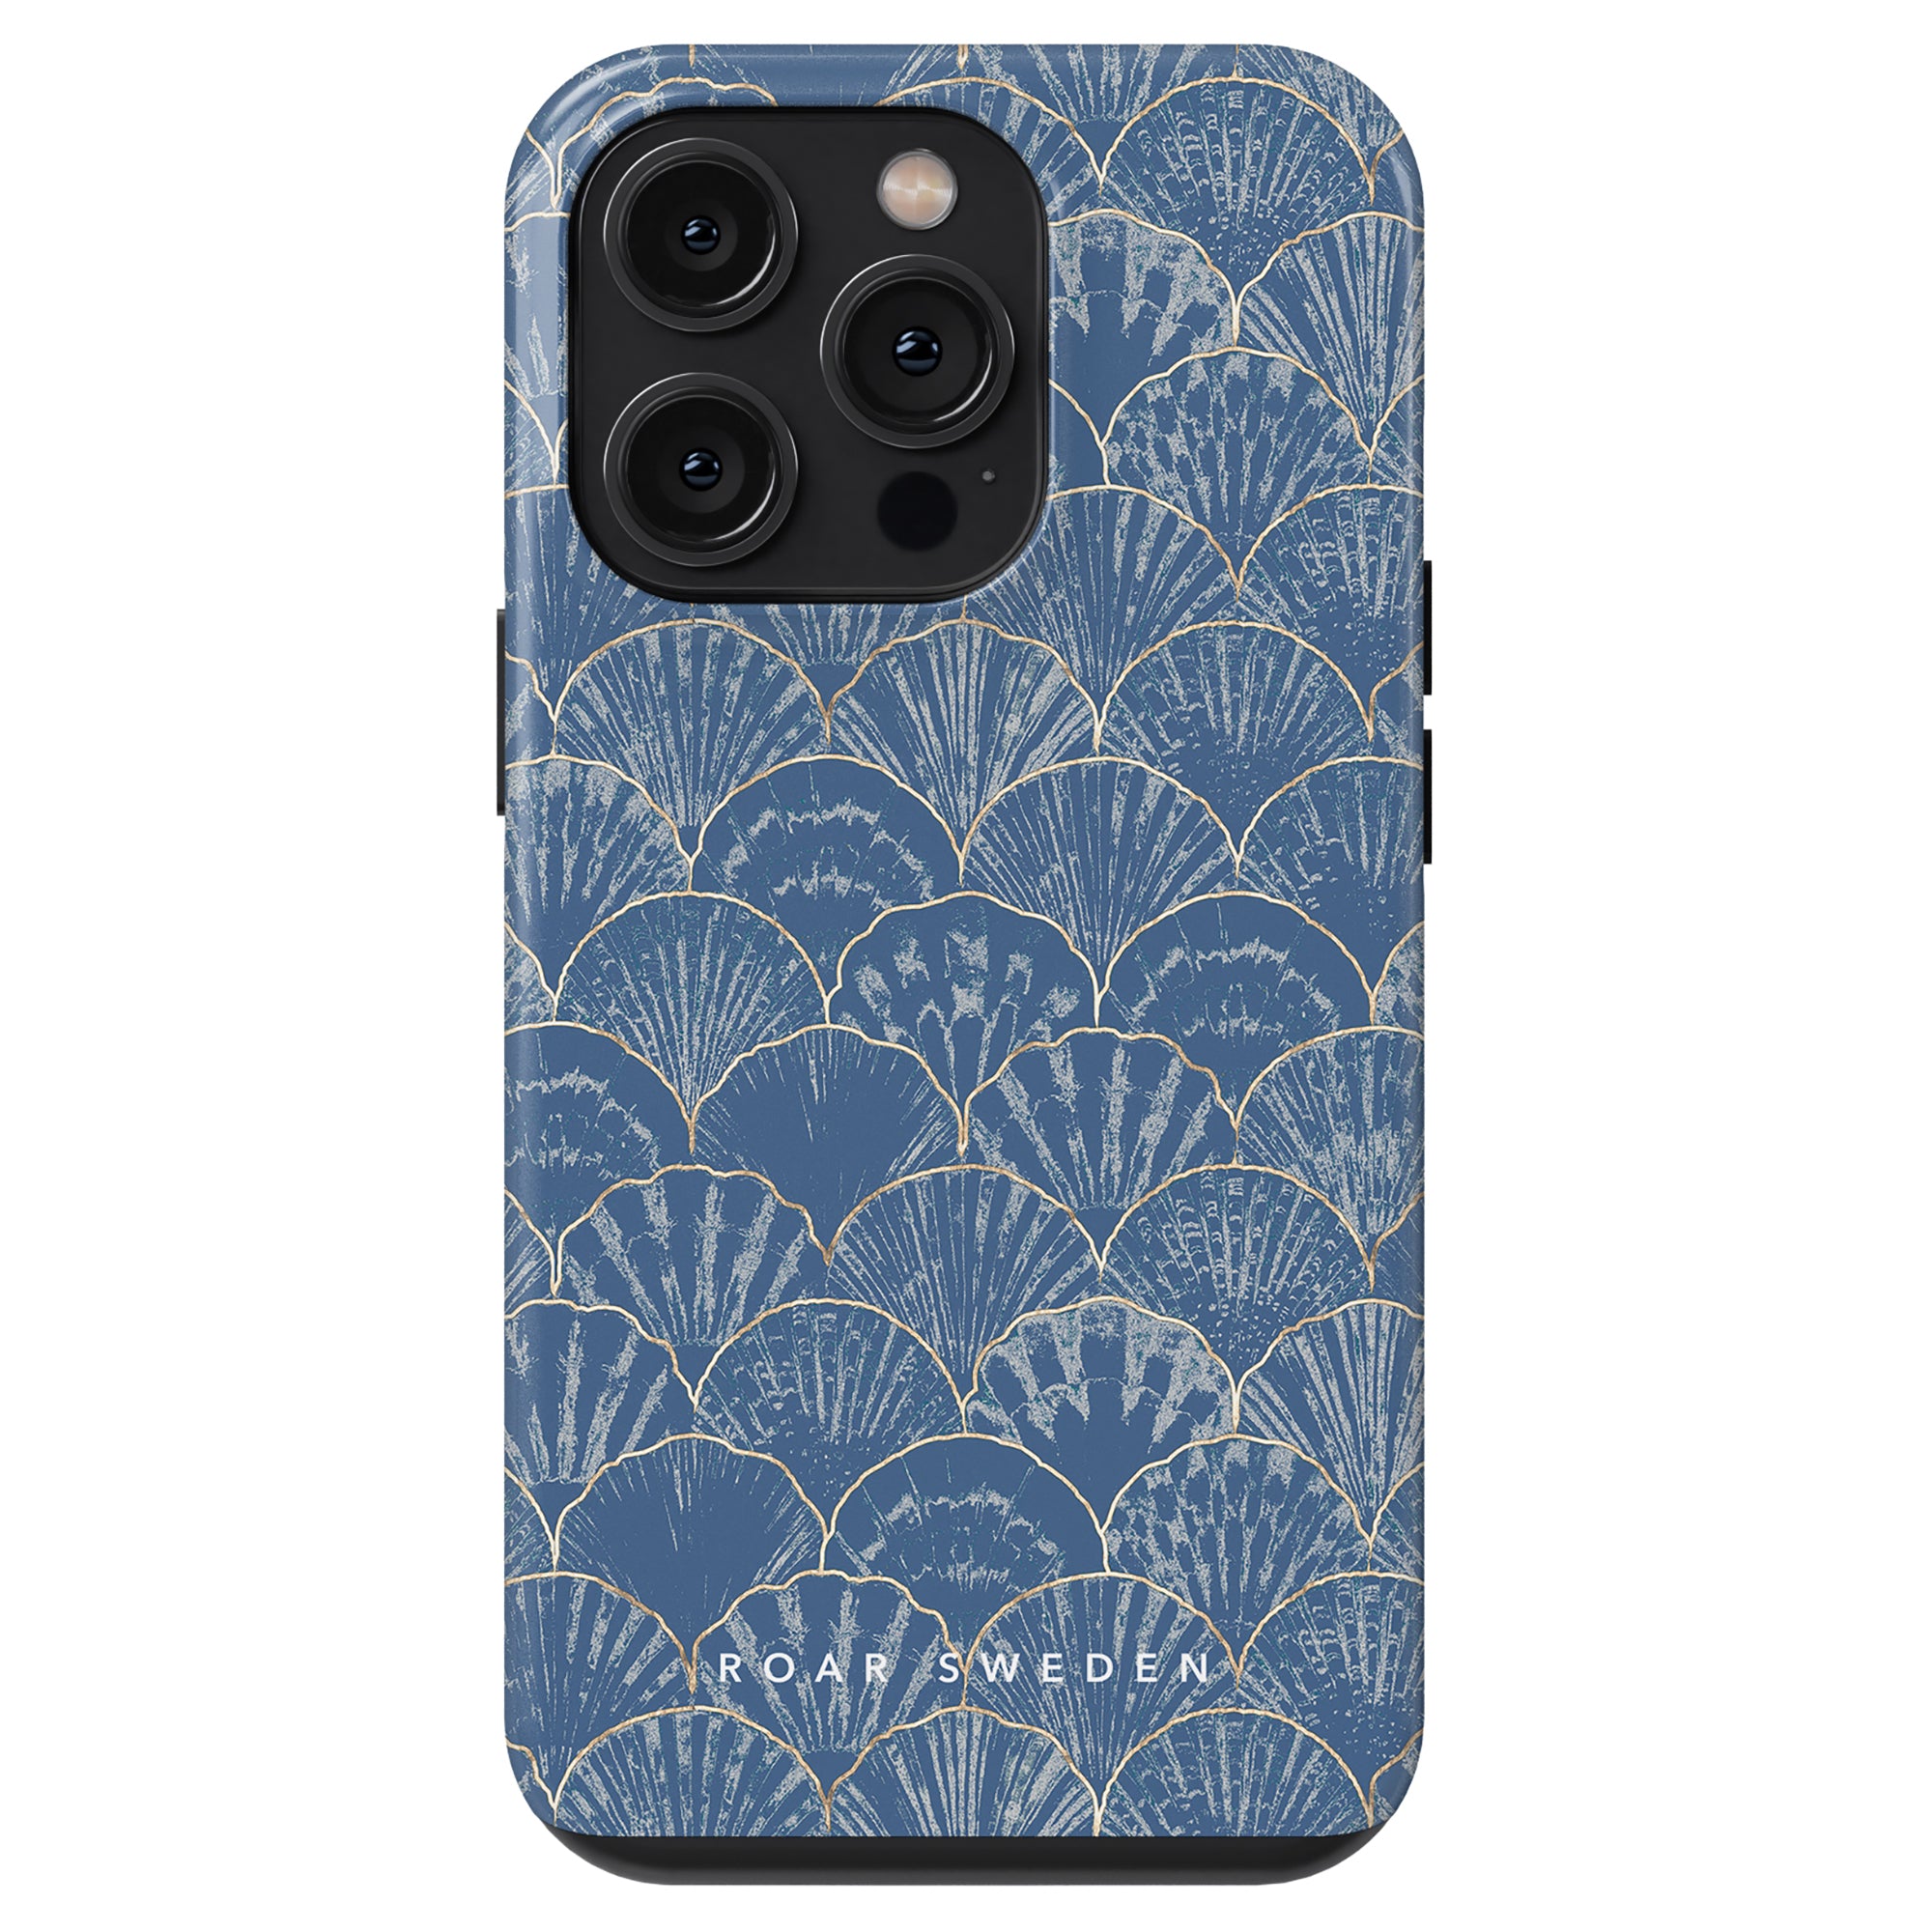 A blue Seashell - Tough Case adorned with seashells, perfect for adding a touch of seaside charm to your device.